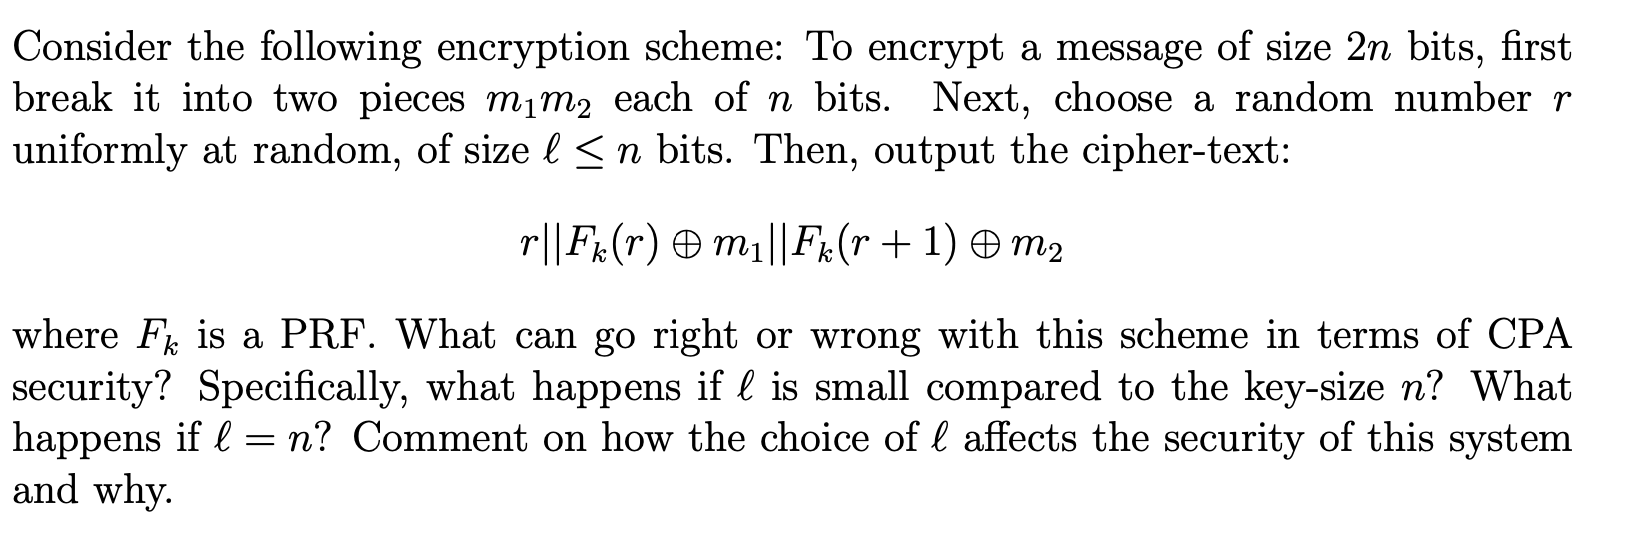 Consider the following encryption scheme: To encrypt a message of size 2n bits, first break it into two